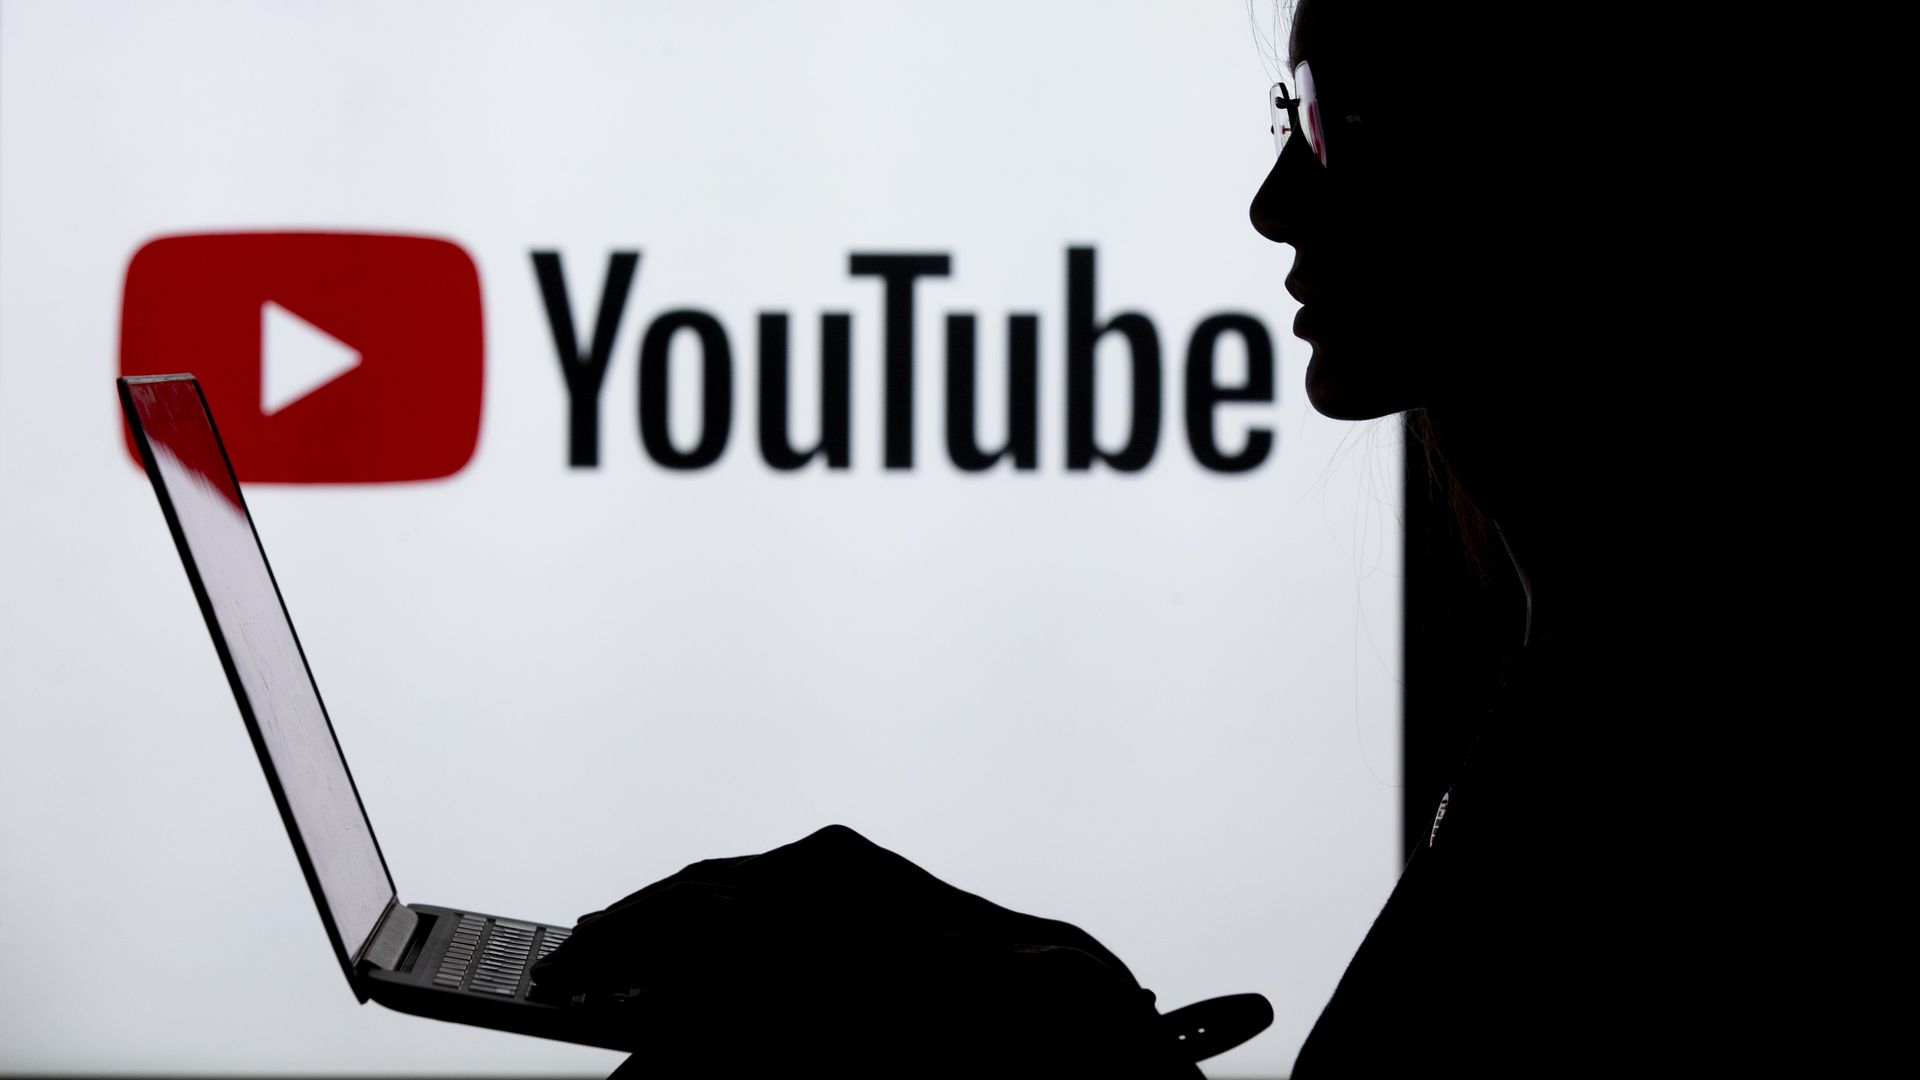 A silhouette of a woman with a laptop in front of the YouTube logo